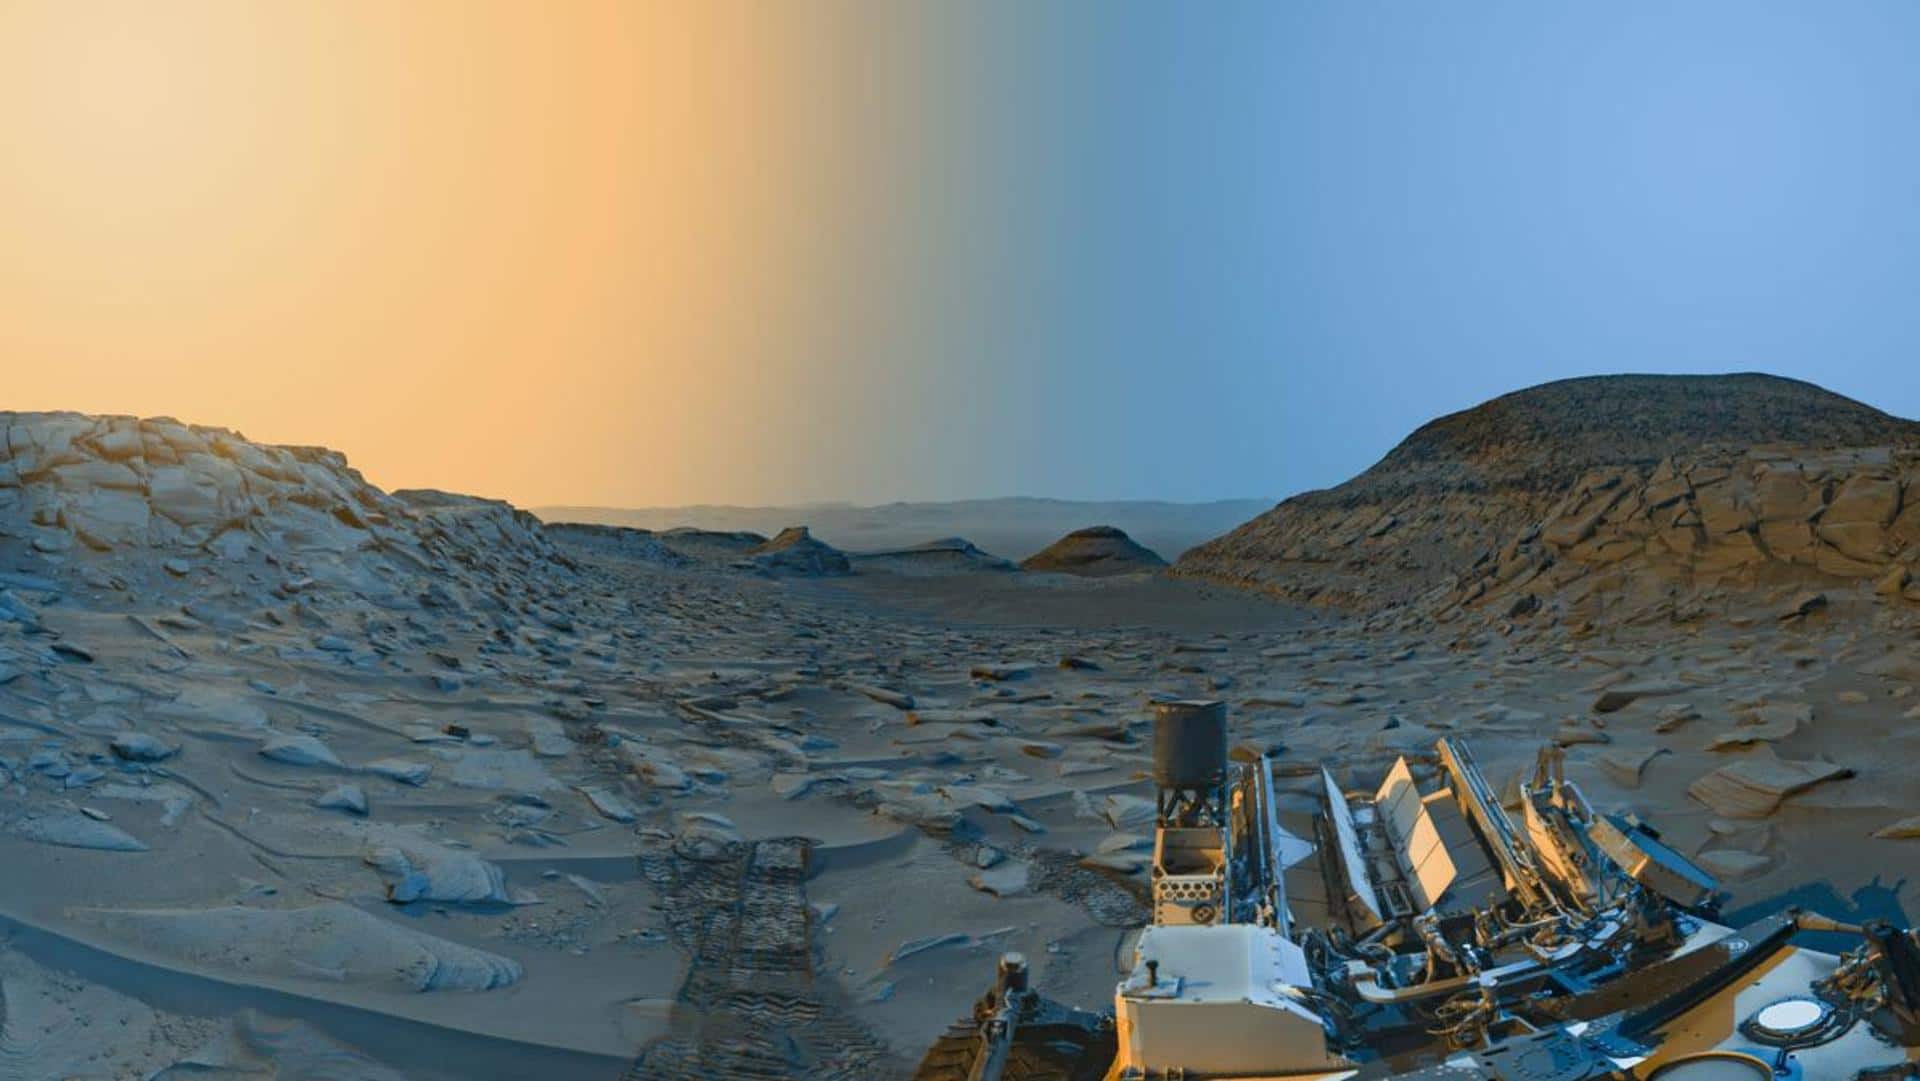 NASA's Curiosity rover documents Martian day and night